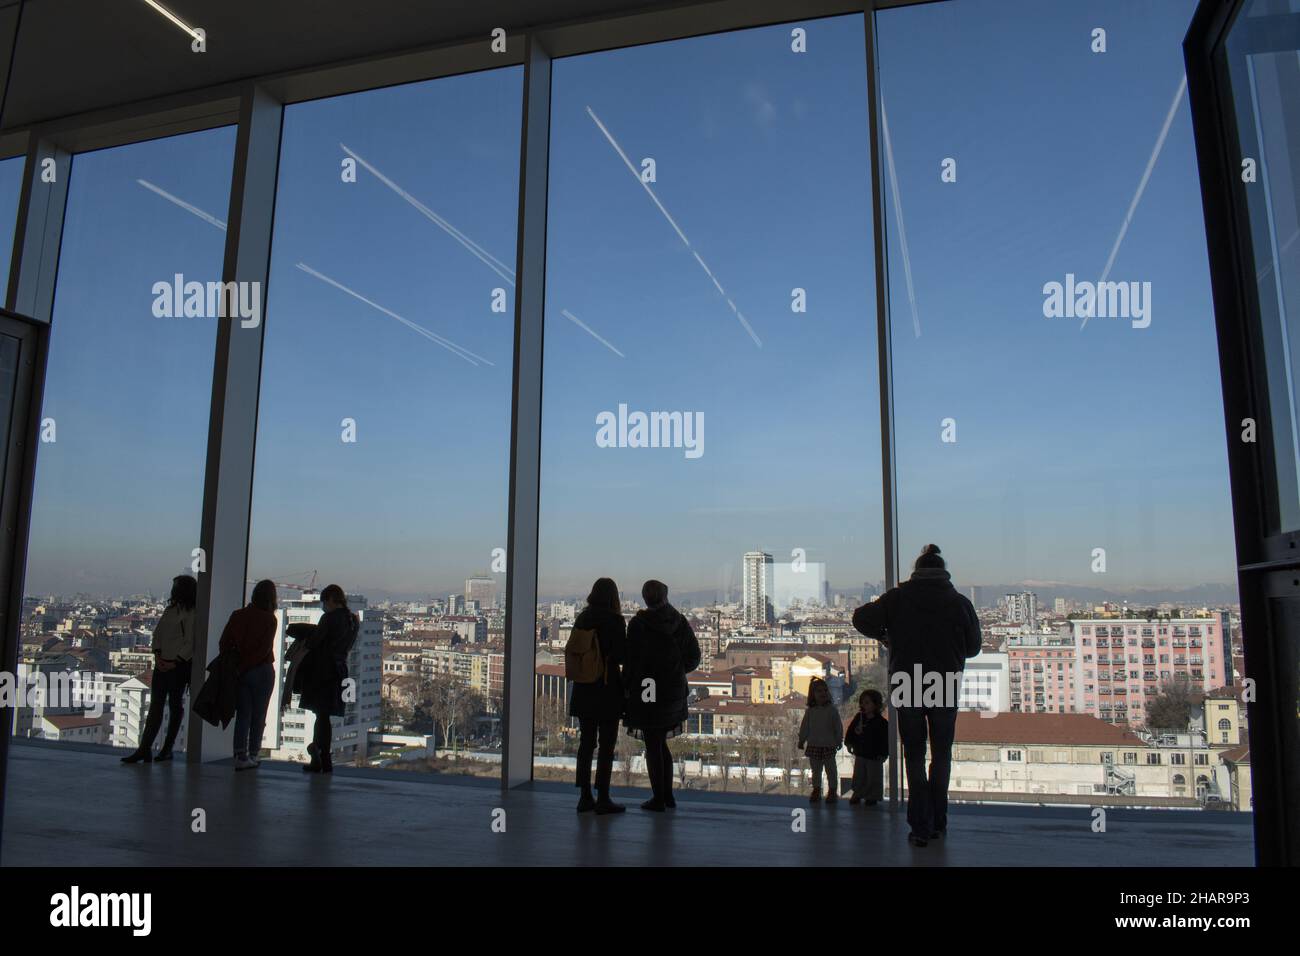 Milan, Italy: People in front of the windows on the skyline from the Tower of Fondazione Prada, the building 60 meters high designed by Rem Koolhaas Stock Photo